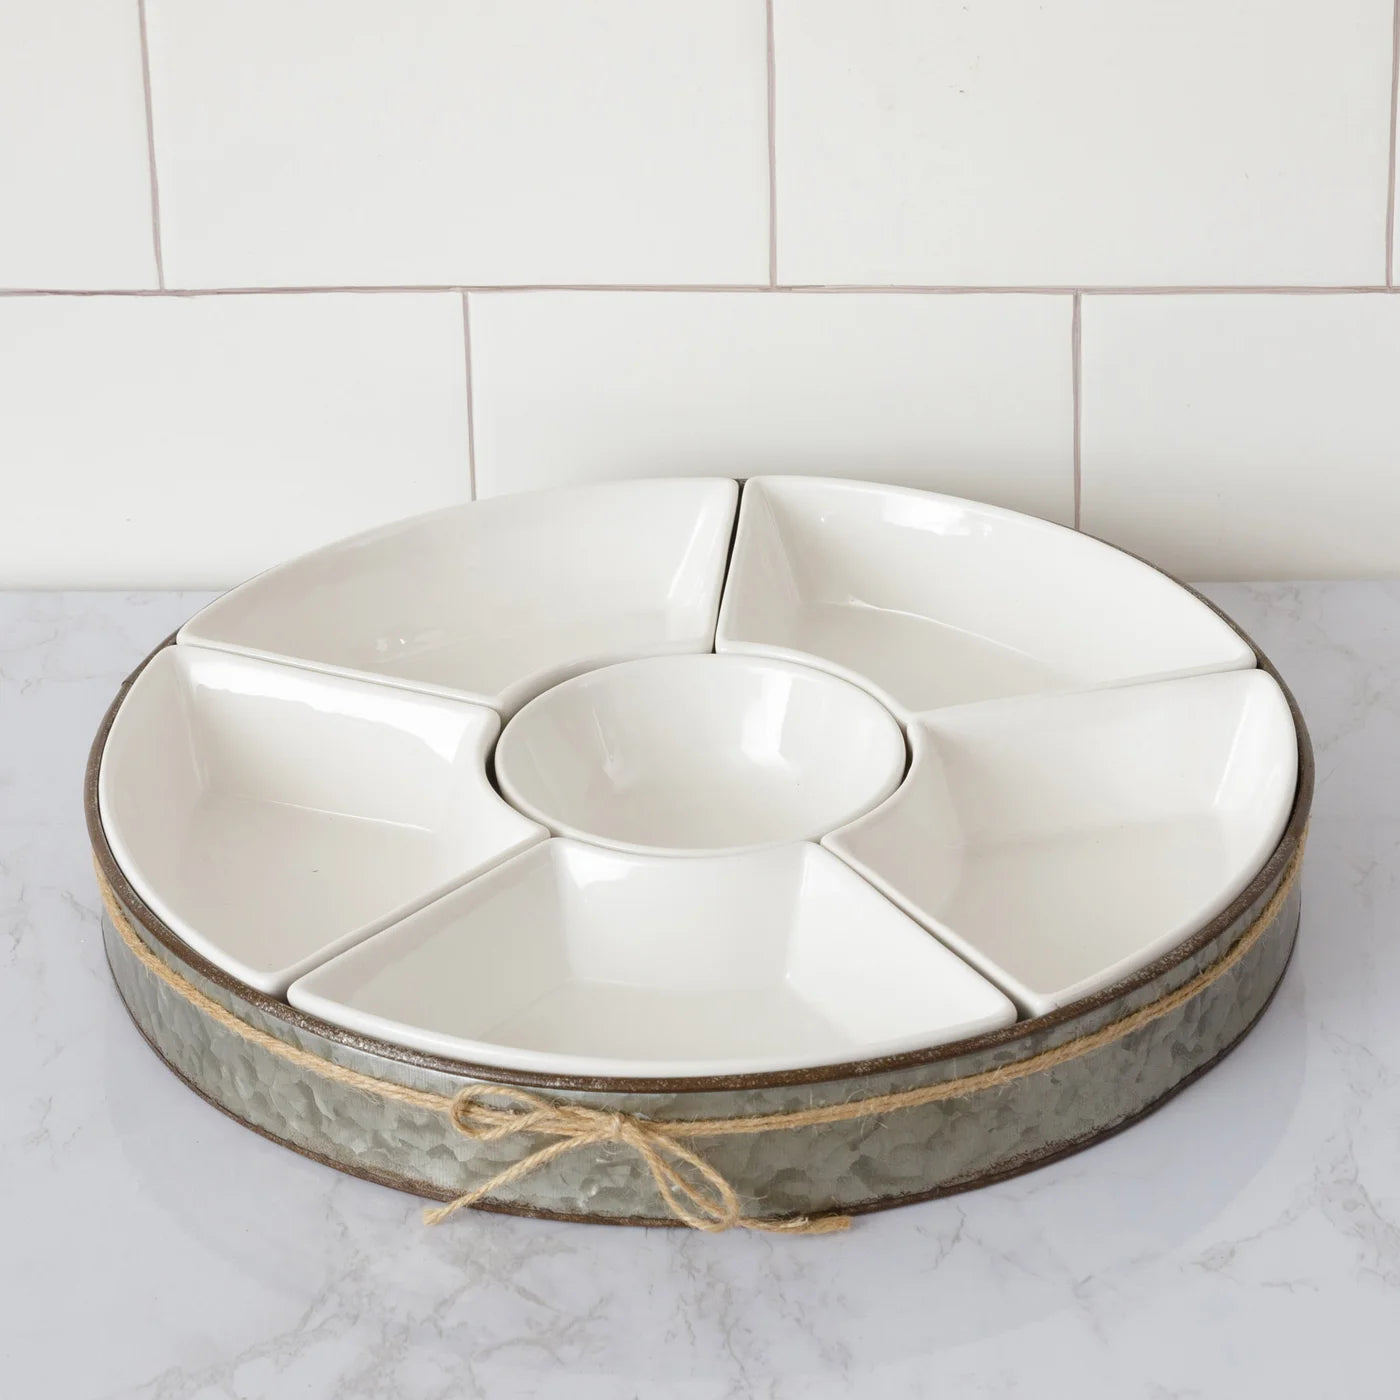 Ceramic Six Section Dip Bowl Set with Metal Tray | Vintage Crossroads